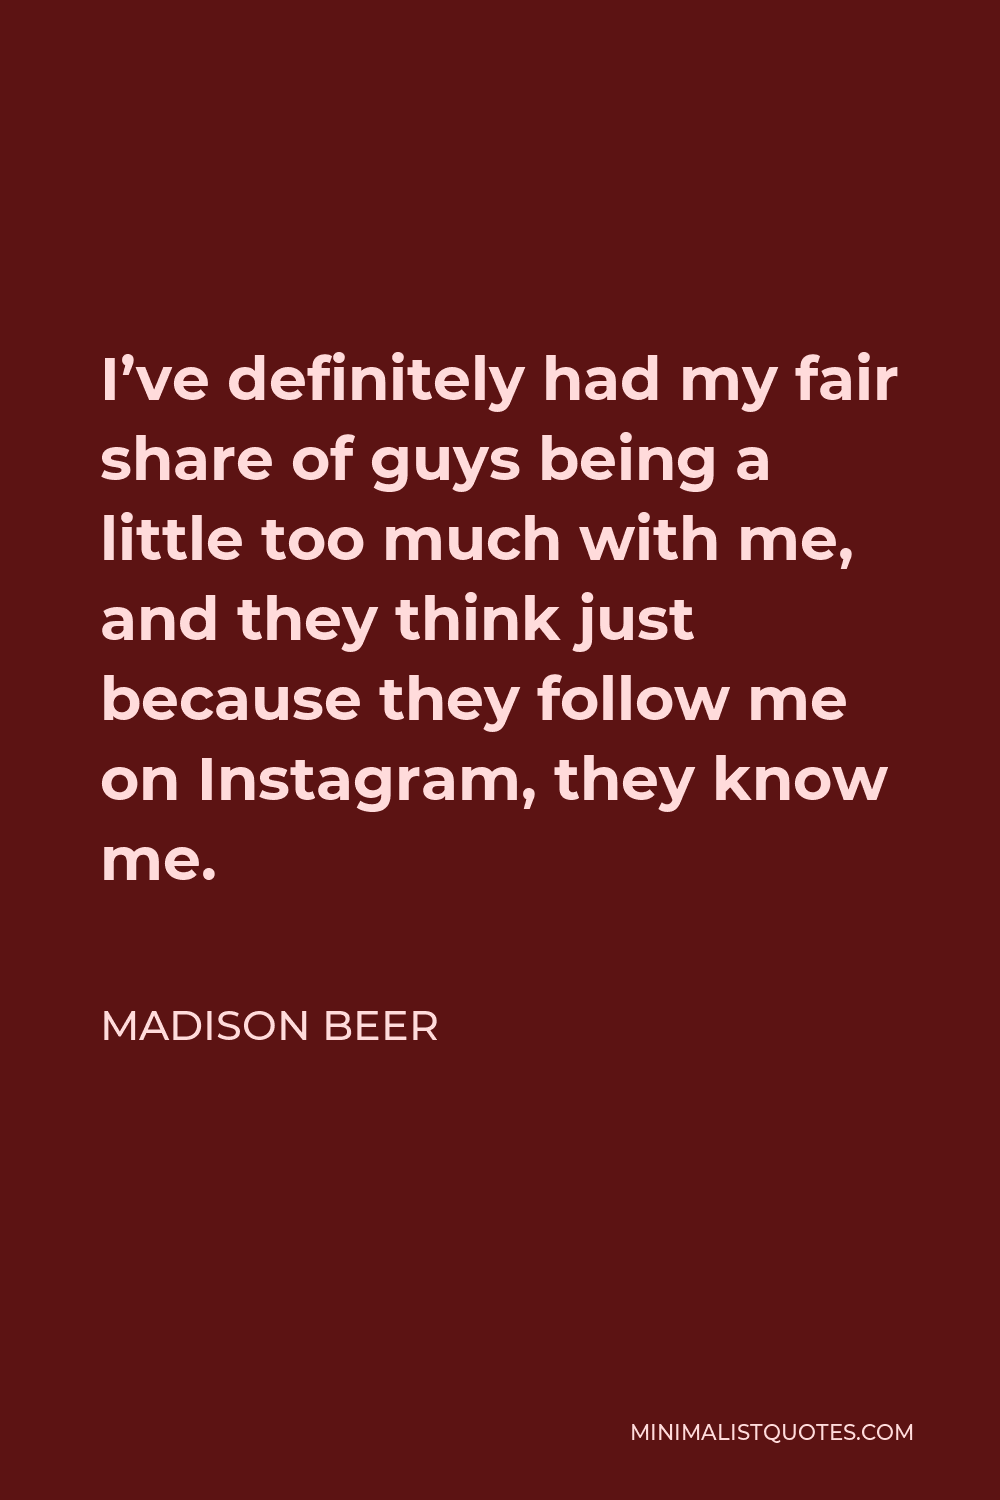 Madison Beer Quote - I’ve definitely had my fair share of guys being a little too much with me, and they think just because they follow me on Instagram, they know me.